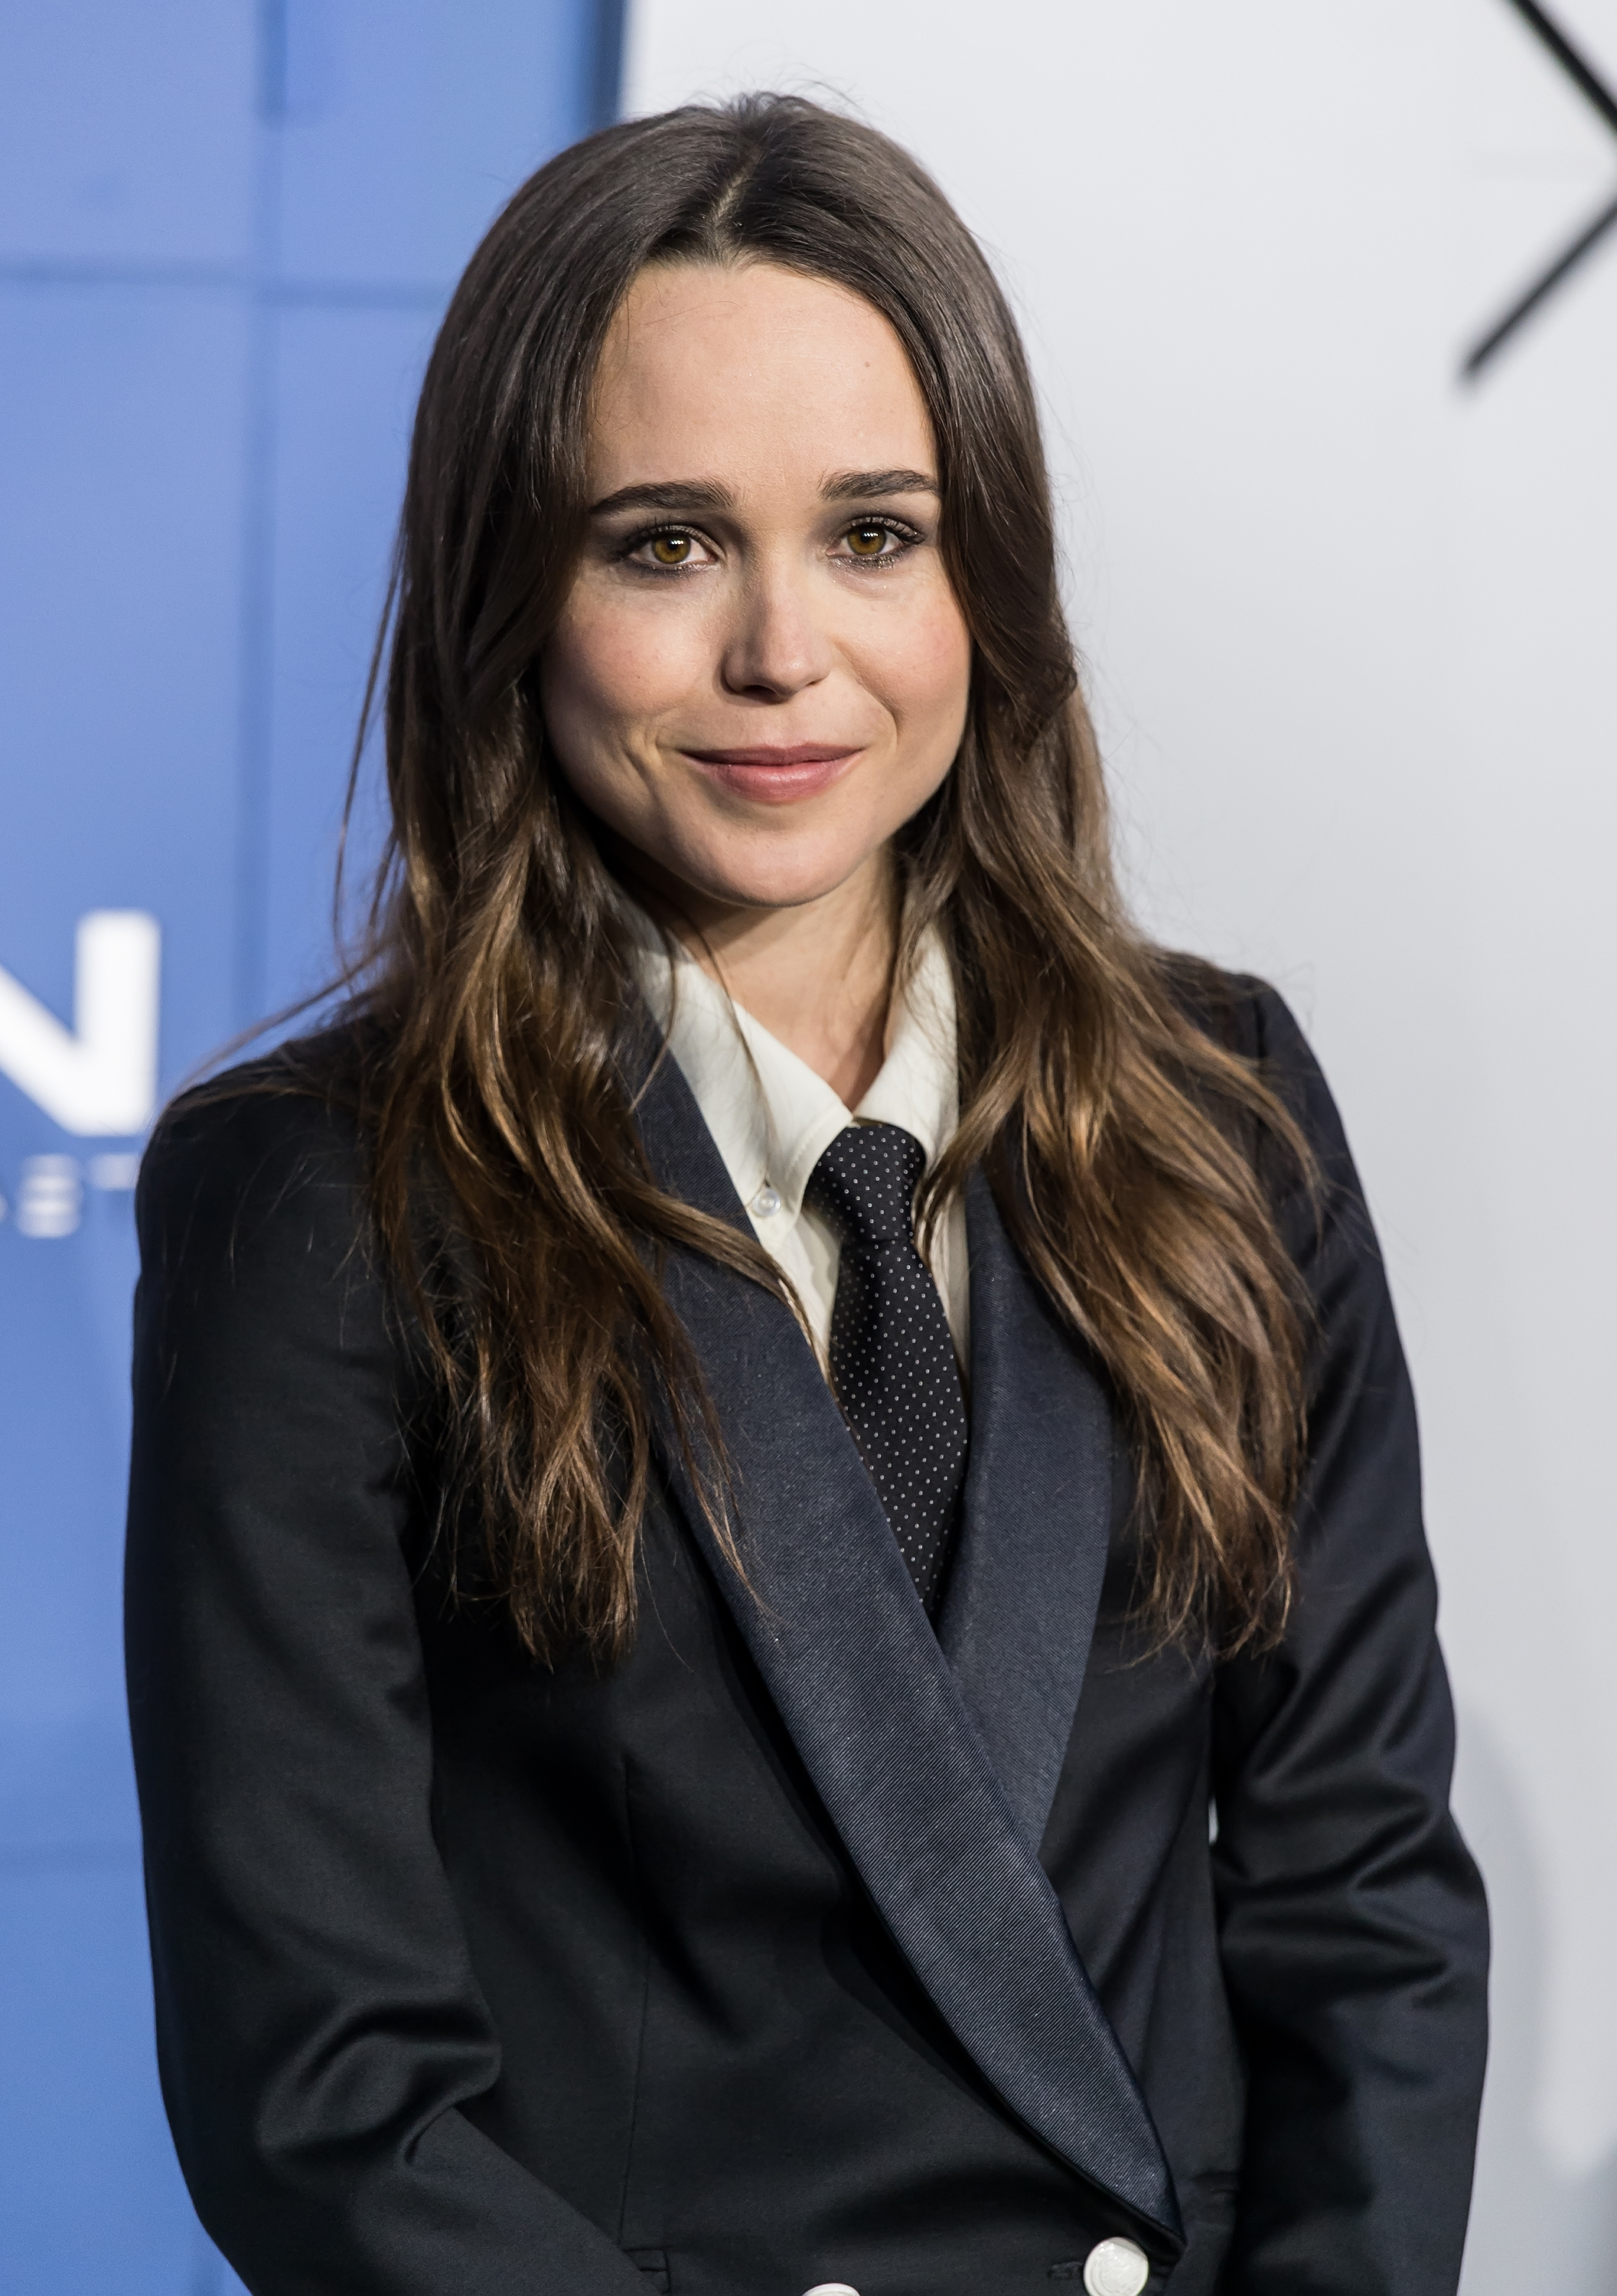 Ellen Page attends the "X-Men: Days Of Future Past" world premiere on May 10 in New York City. (Gilbert Carrasquillo—FilmMagic)